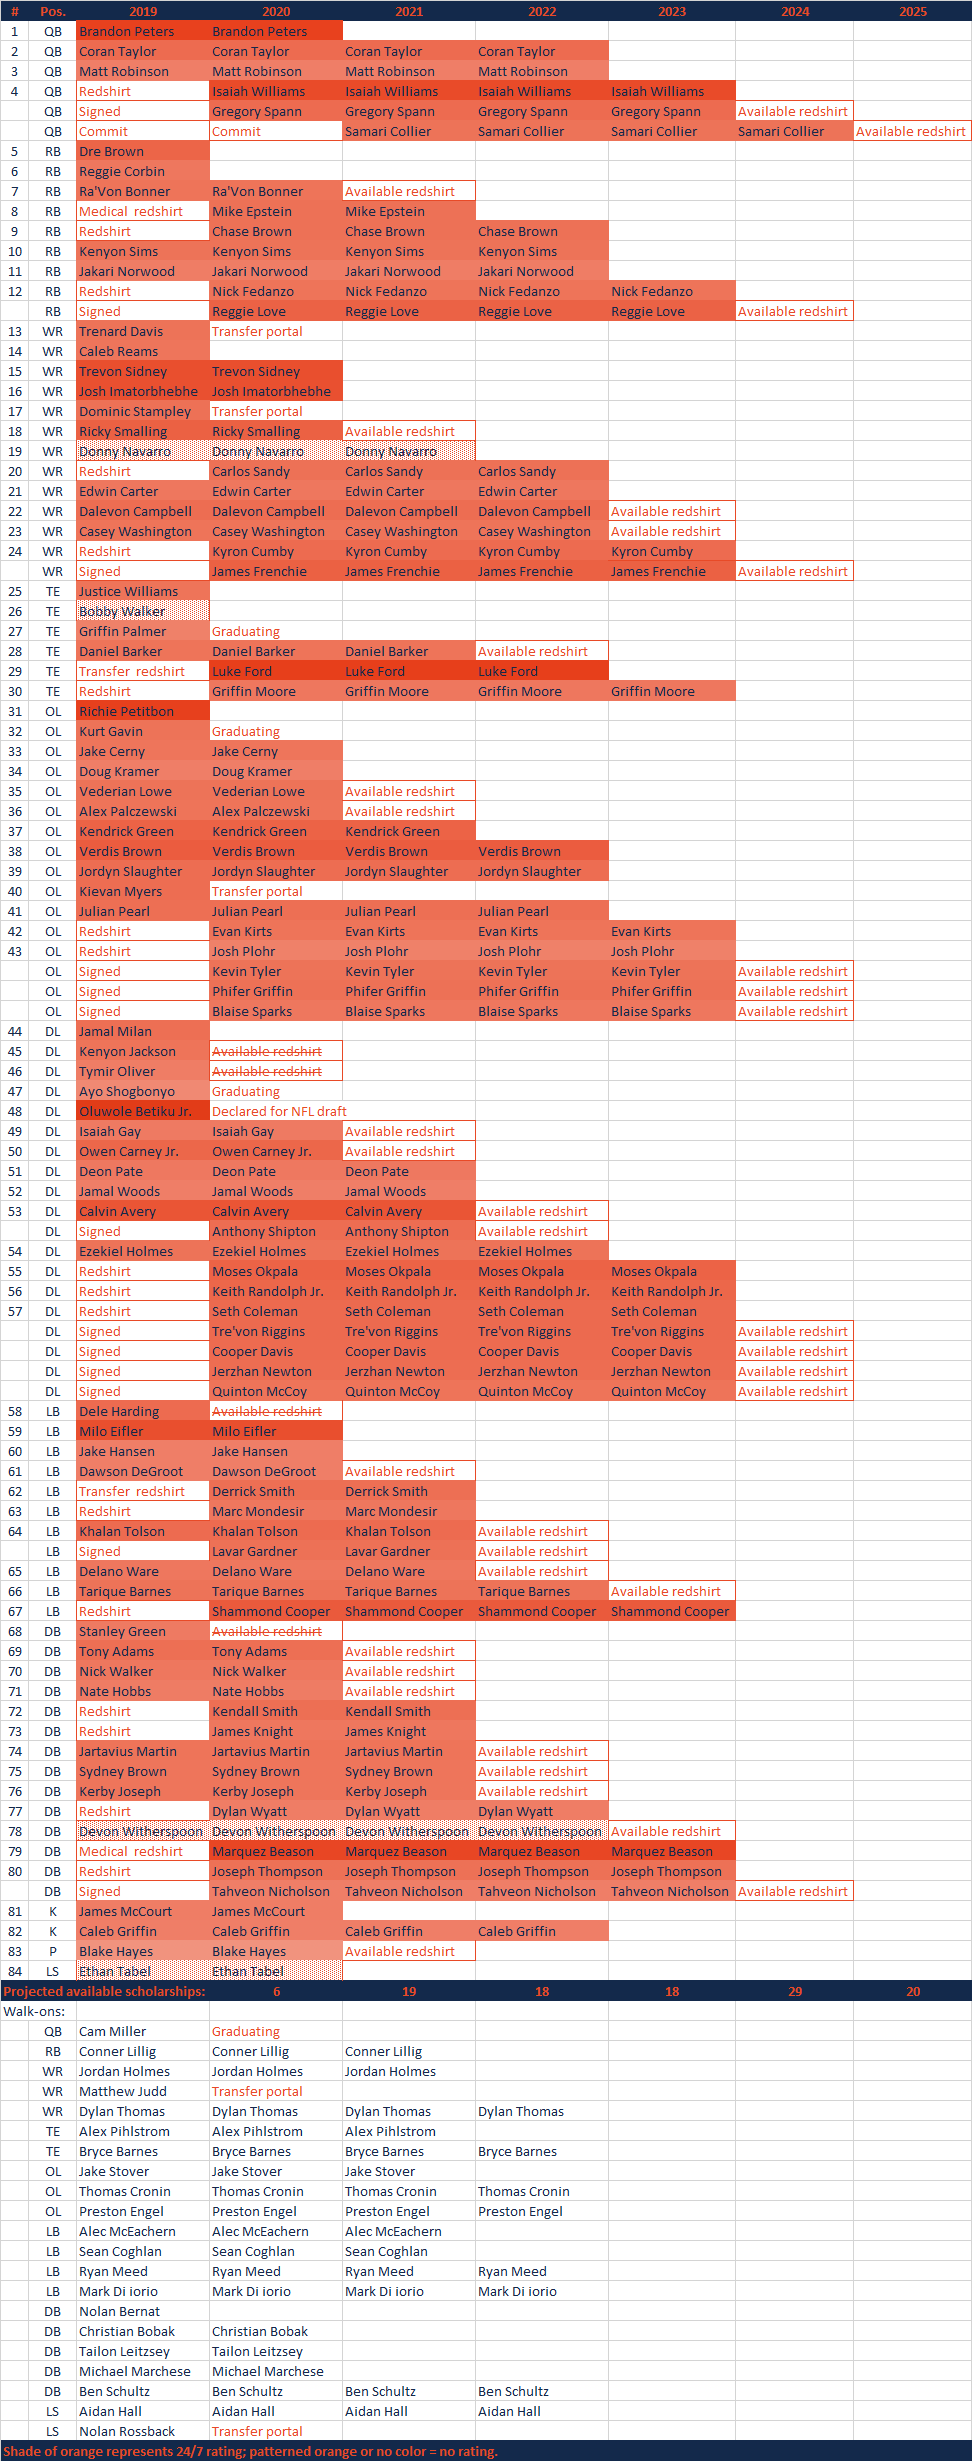 2019ScholarshipGrid.png